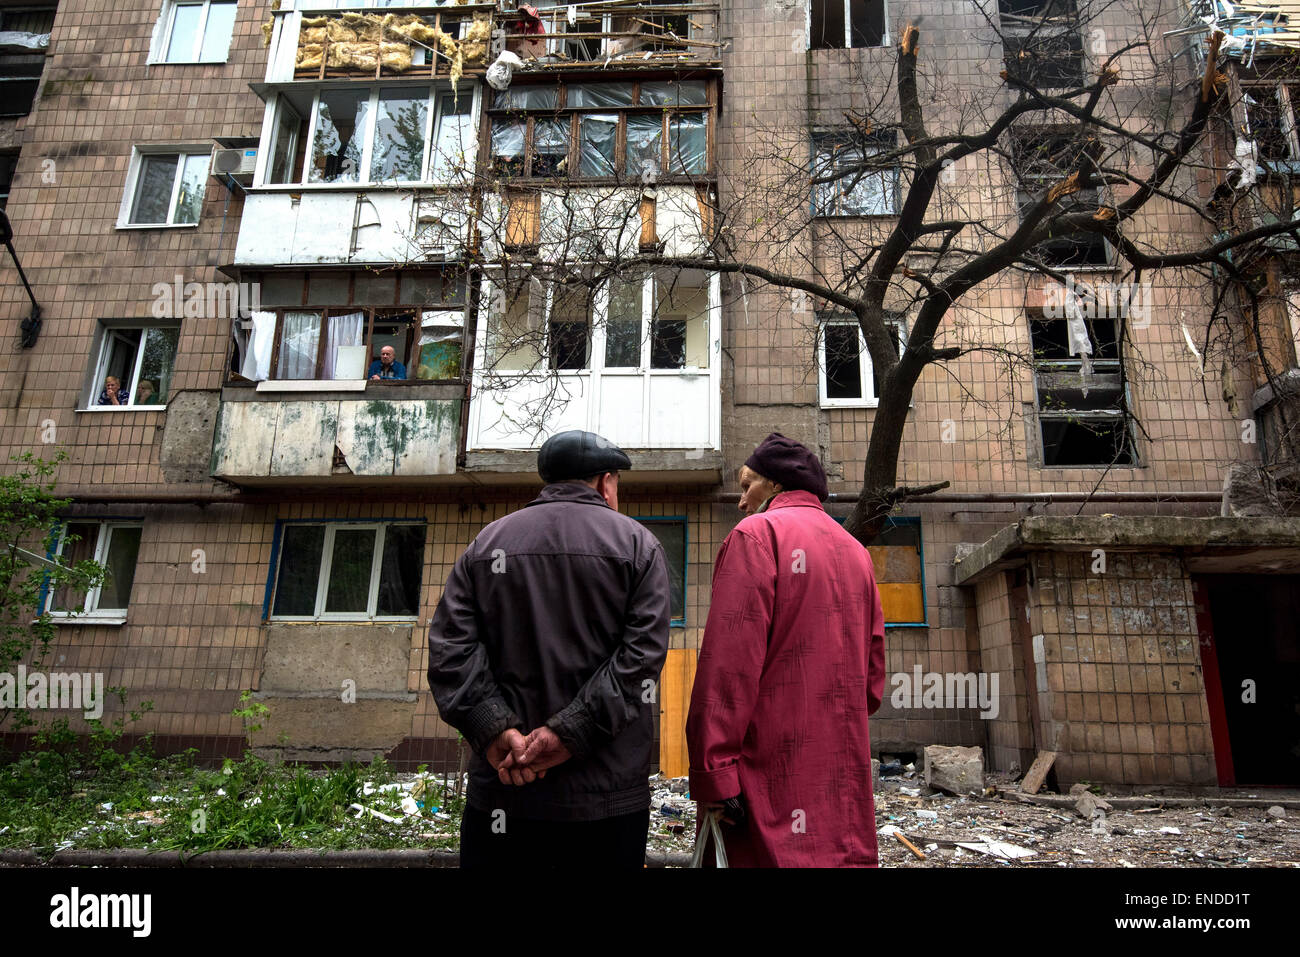 Donetsk, Ukraine, 03 May 2015. Residents of an apartment block in Kyivskyi district of Donetsk City survey damage caused by shelling the previous evening. The self-proclaimed Donetsk People's Republic has blamed Ukrainian forces for the attack. Photo: James Sprankle/dpa/Alamy Live News Stock Photo